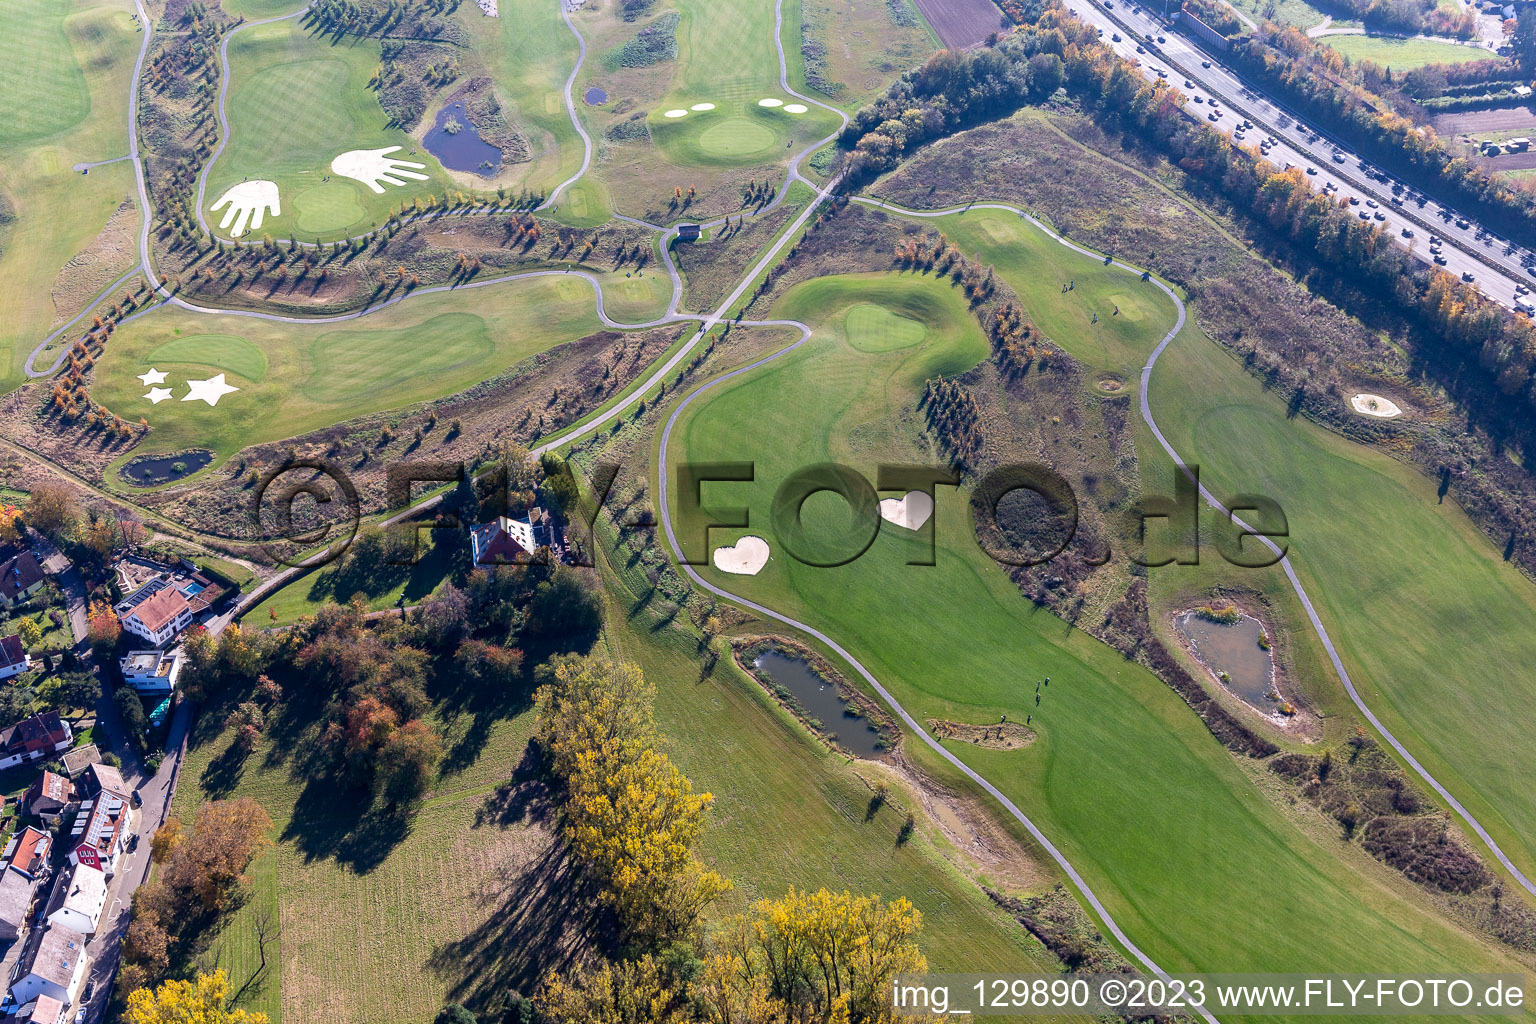 Oblique view of Grounds of the Golf course at Golfpark Karlsruhe GOLF absolute in Karlsruhe in the state Baden-Wuerttemberg, Germany